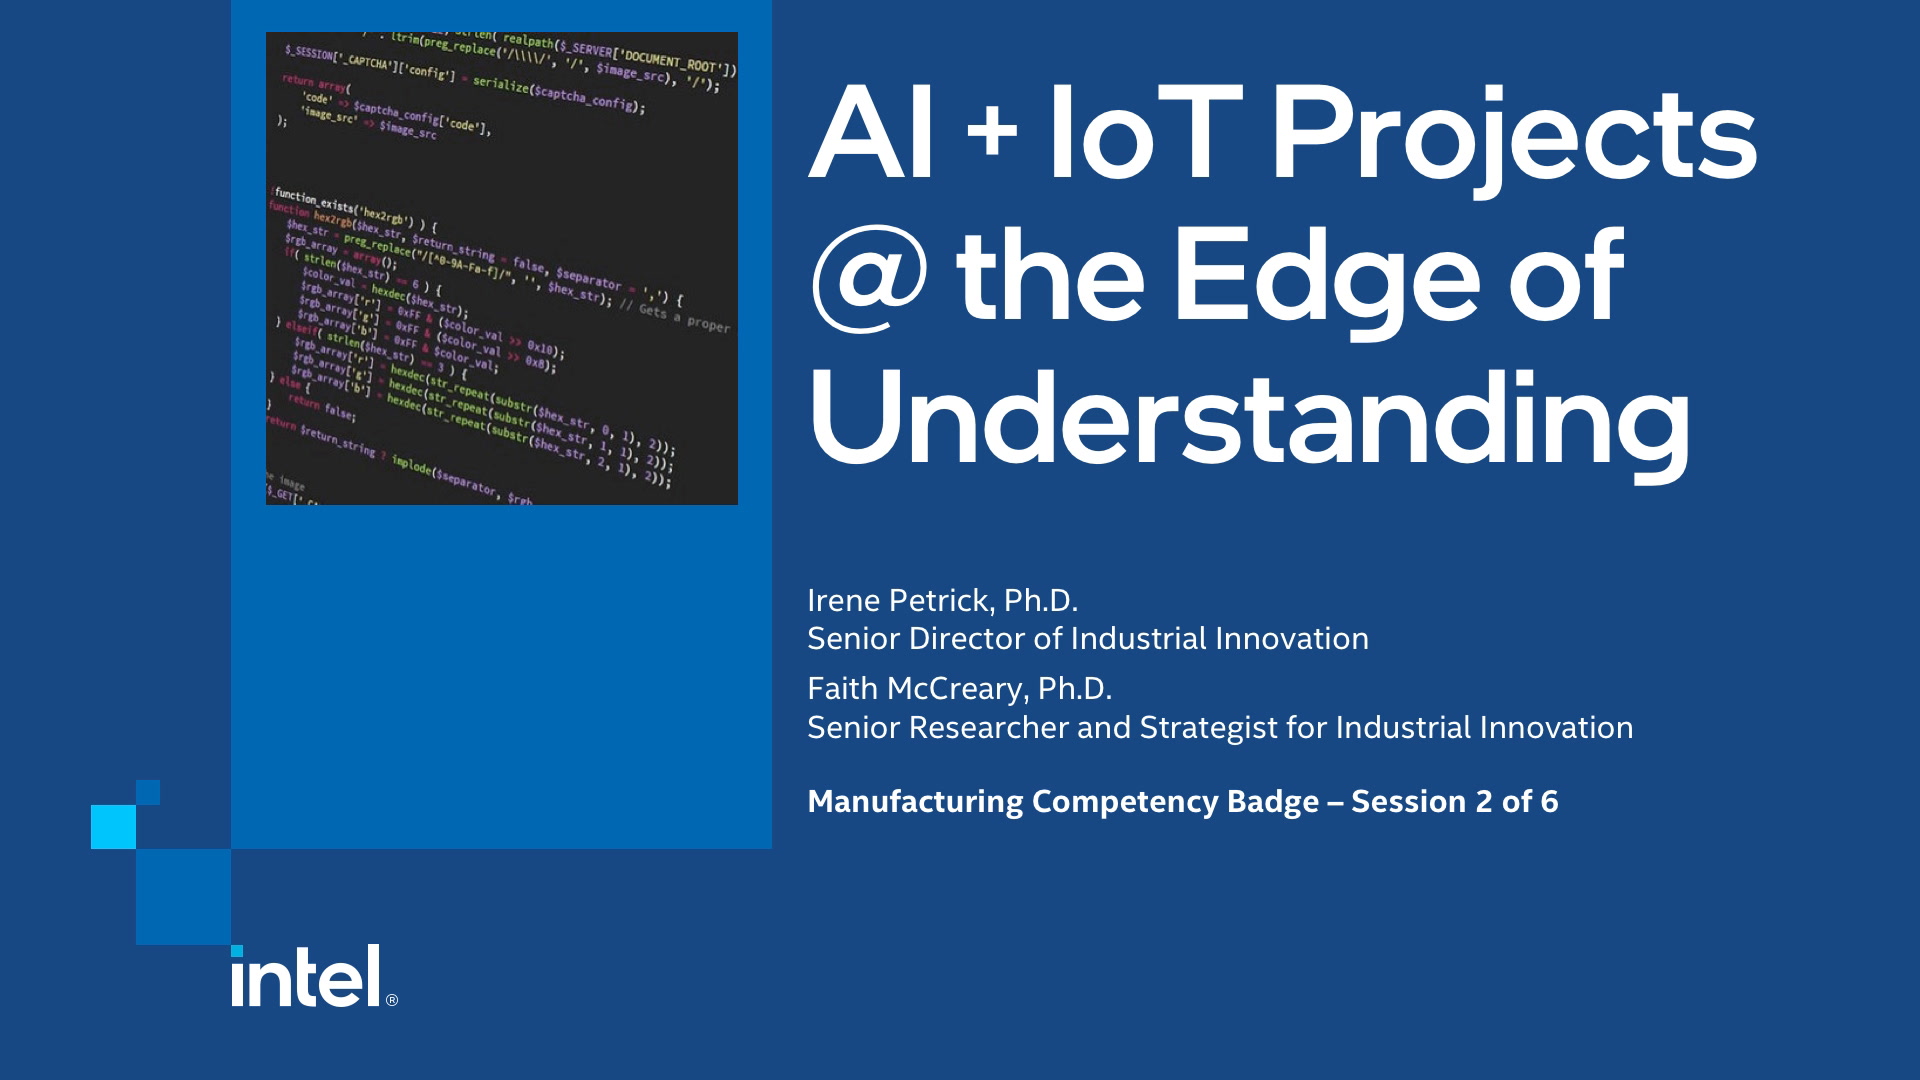 Chapter 1: IoT Projects at the Edge of Understanding